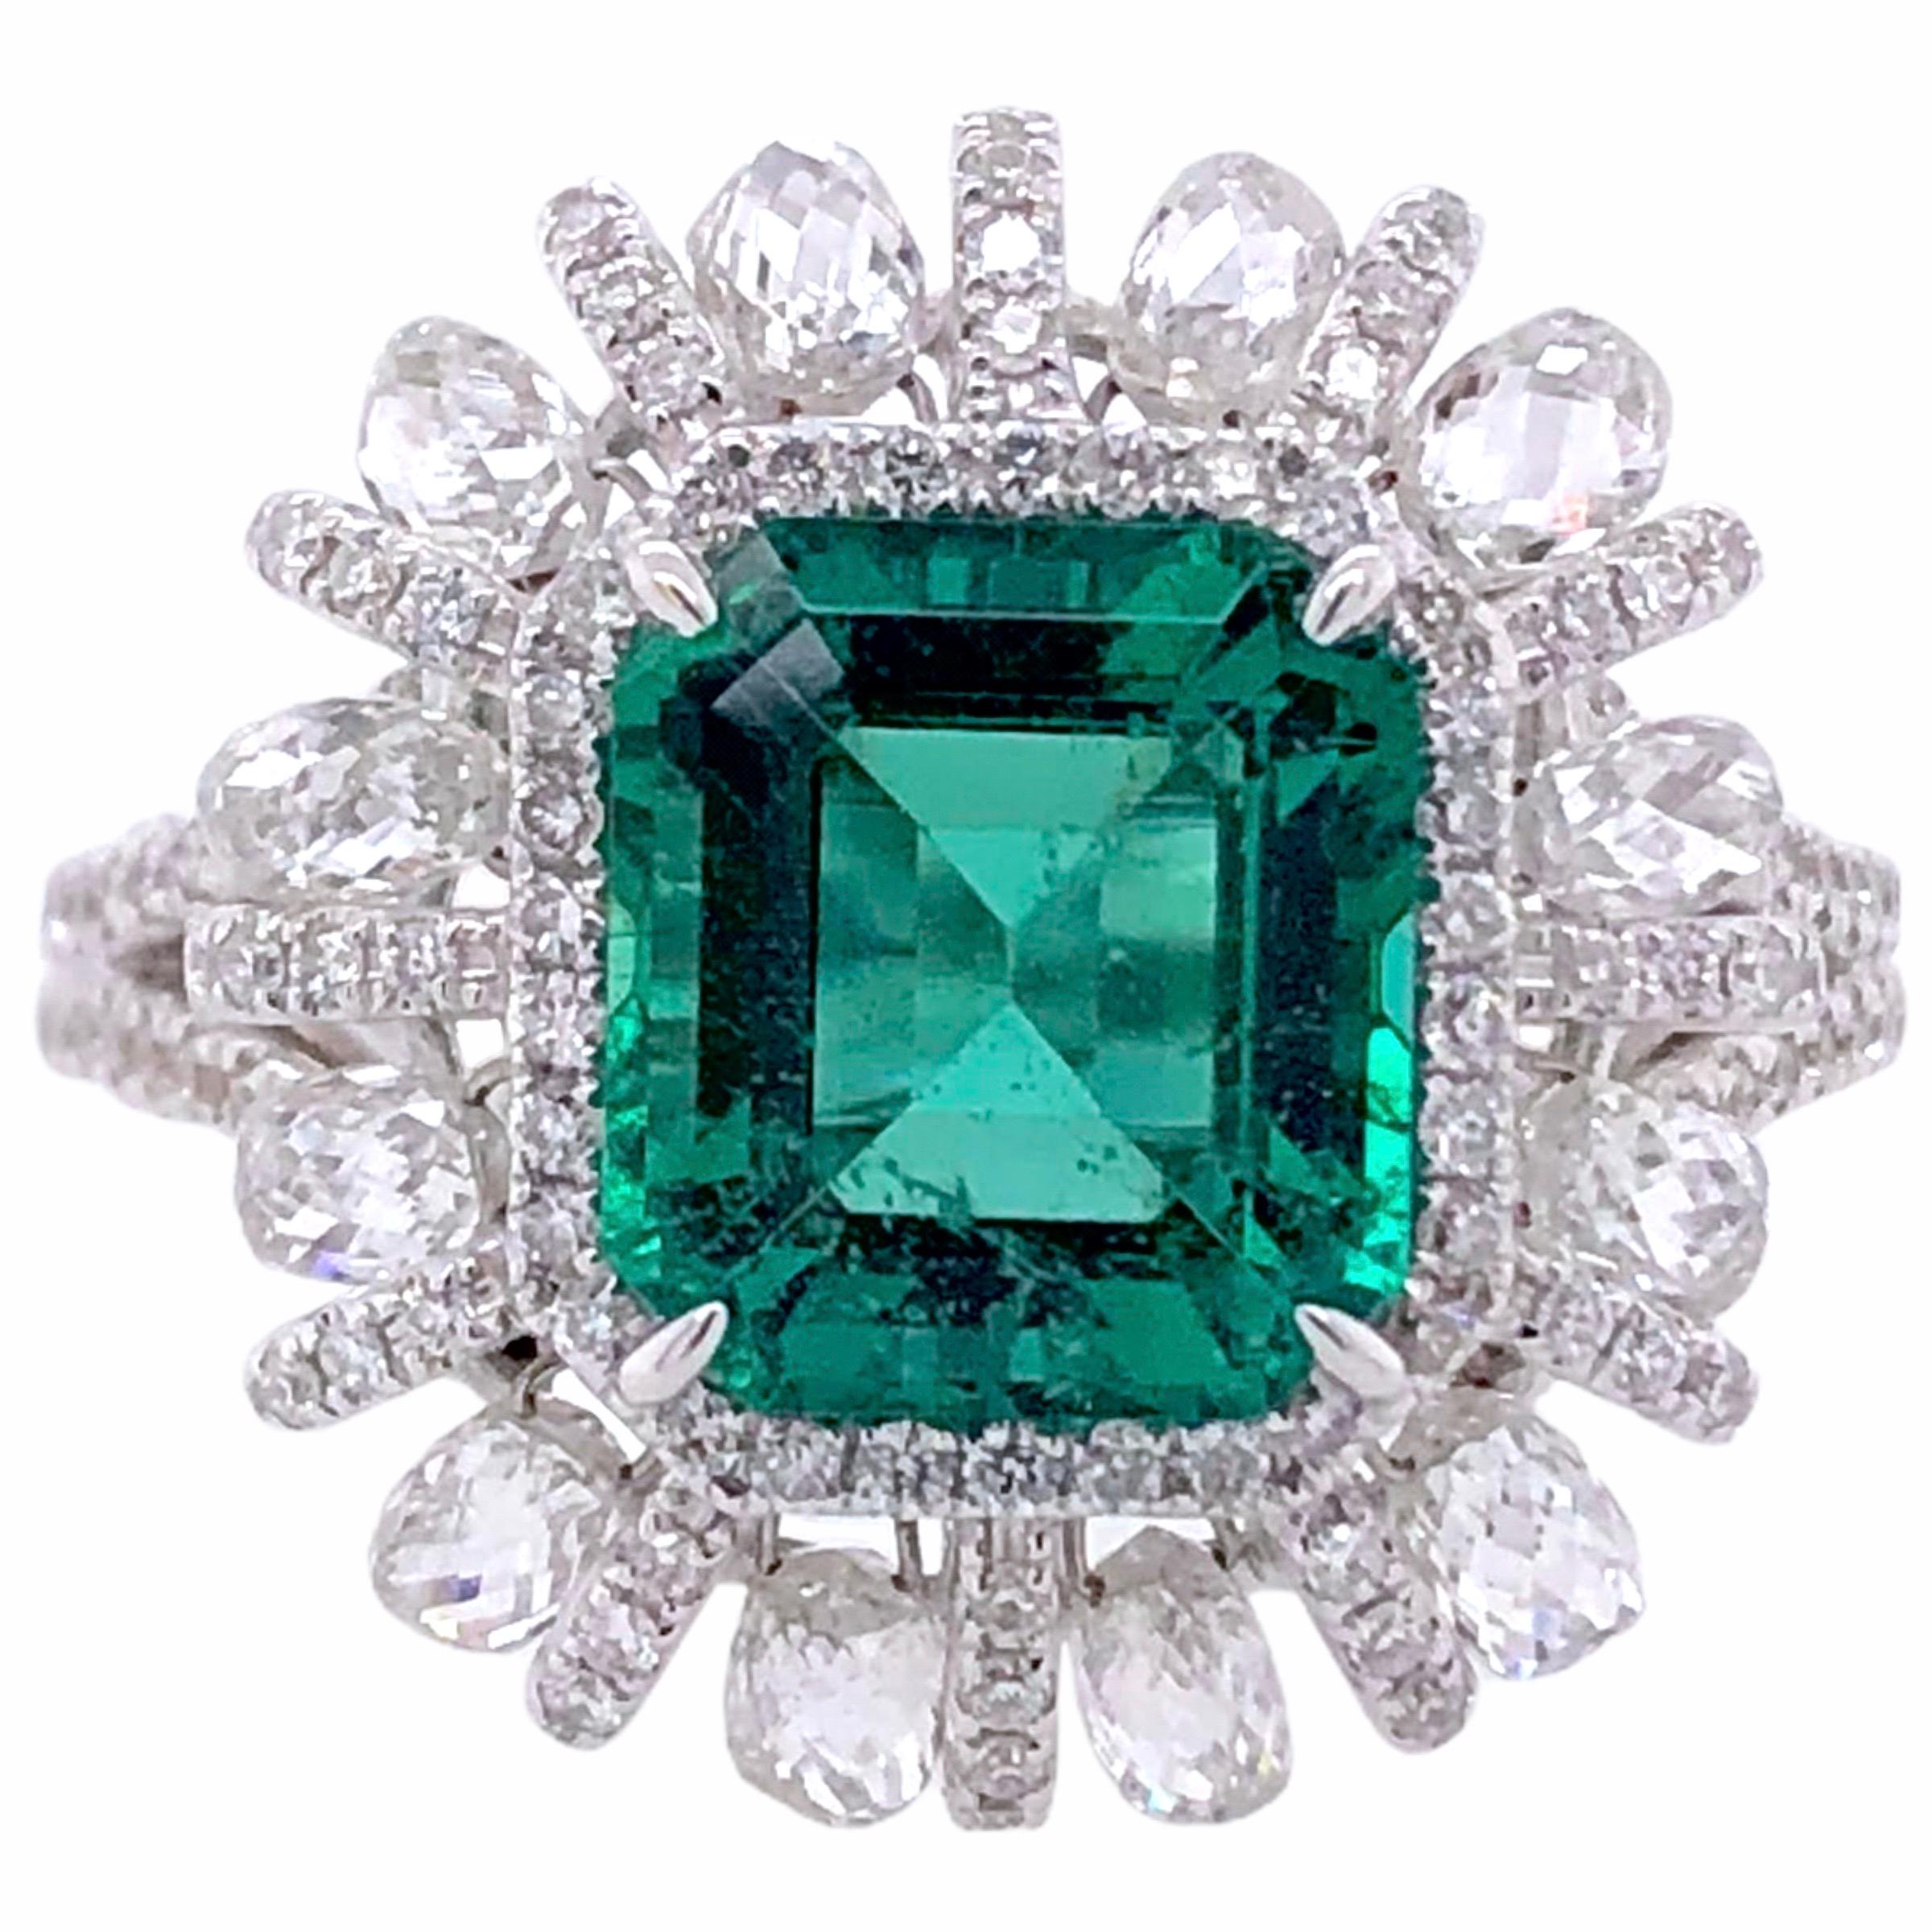 PARIS Craft House 2.98ct Emerald Diamond Ring in 18 Karat White Gold.

- 1 Cushion-cut Emerald/2.98ct
- 12 Briolette-cut Diamonds/1.60ct
- 252 Round Diamonds/0.82ct
- 18K White Gold/7.02ct
- Size of ring fitted to finger.

Designed and crafted at